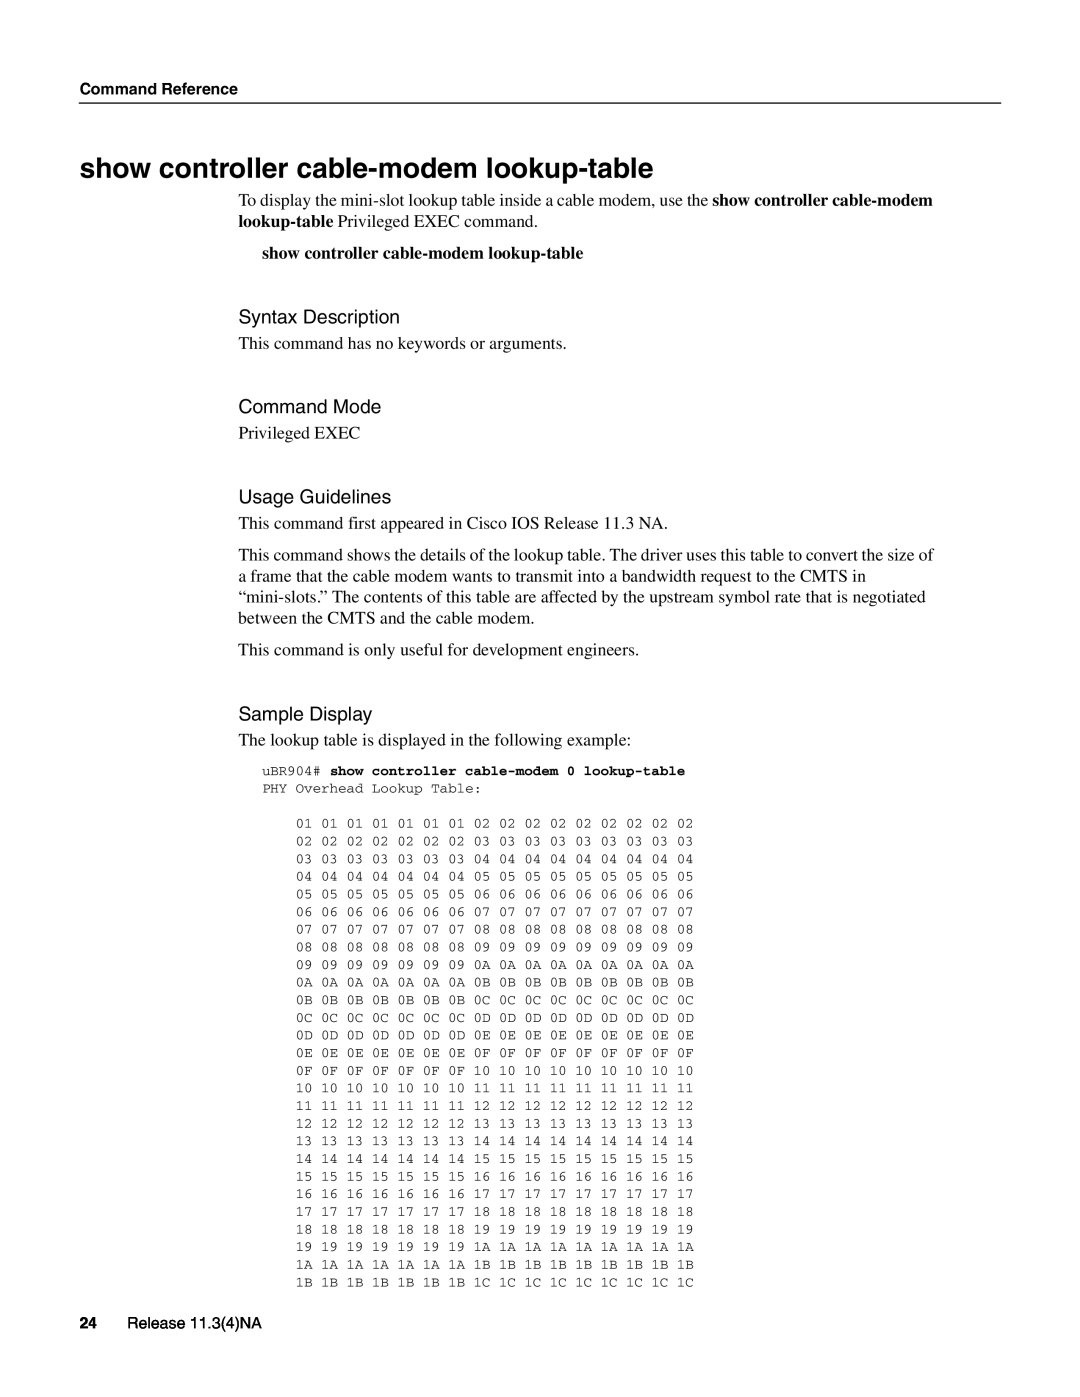 Cisco Systems UBR904 manual show controller cable-modem lookup-table, Syntax Description, Command Mode, Usage Guidelines 